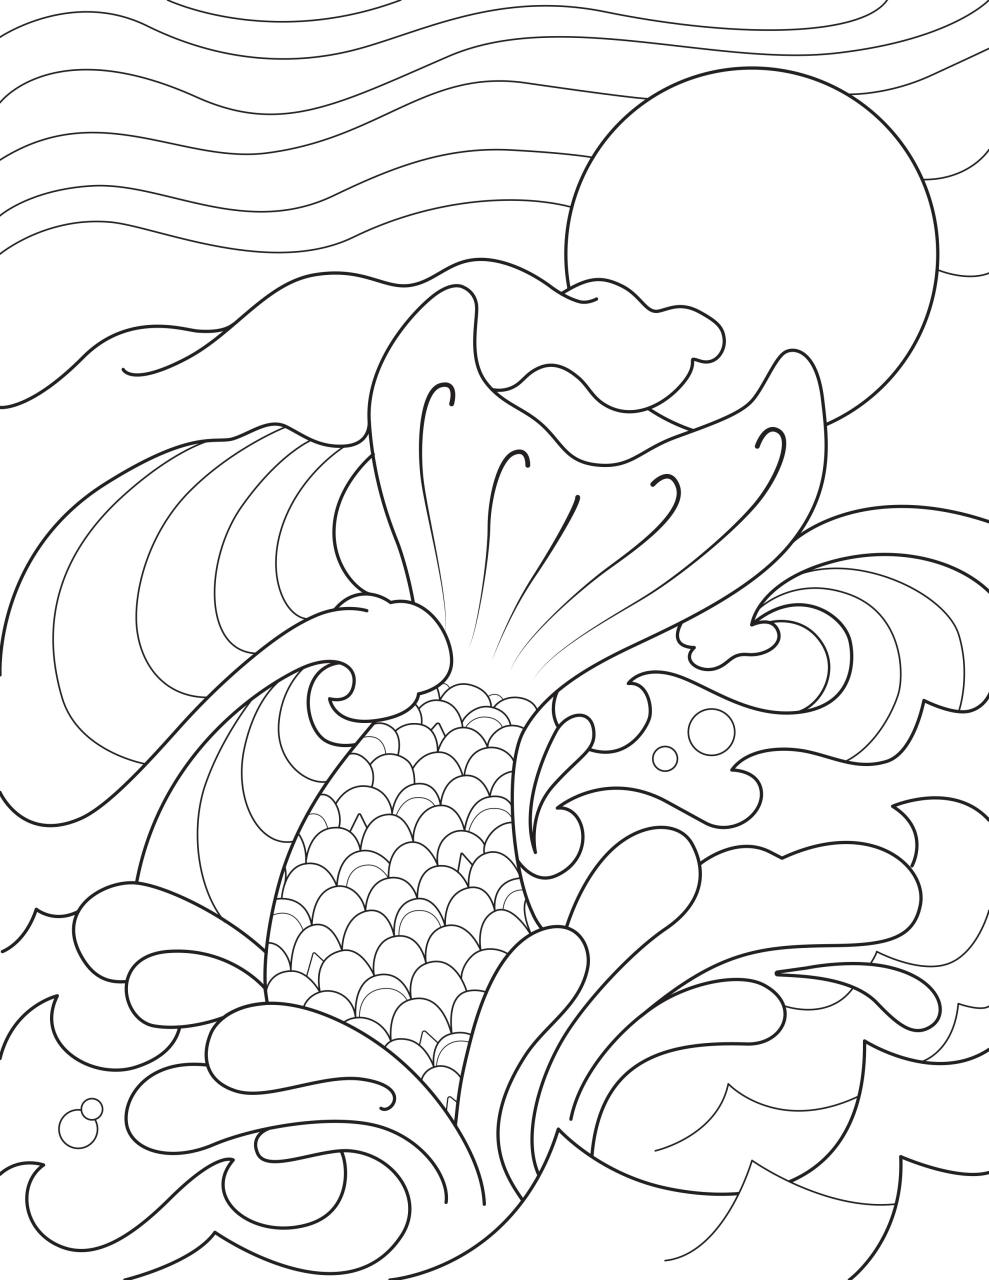 Printable Mermaid Tail Coloring Pages